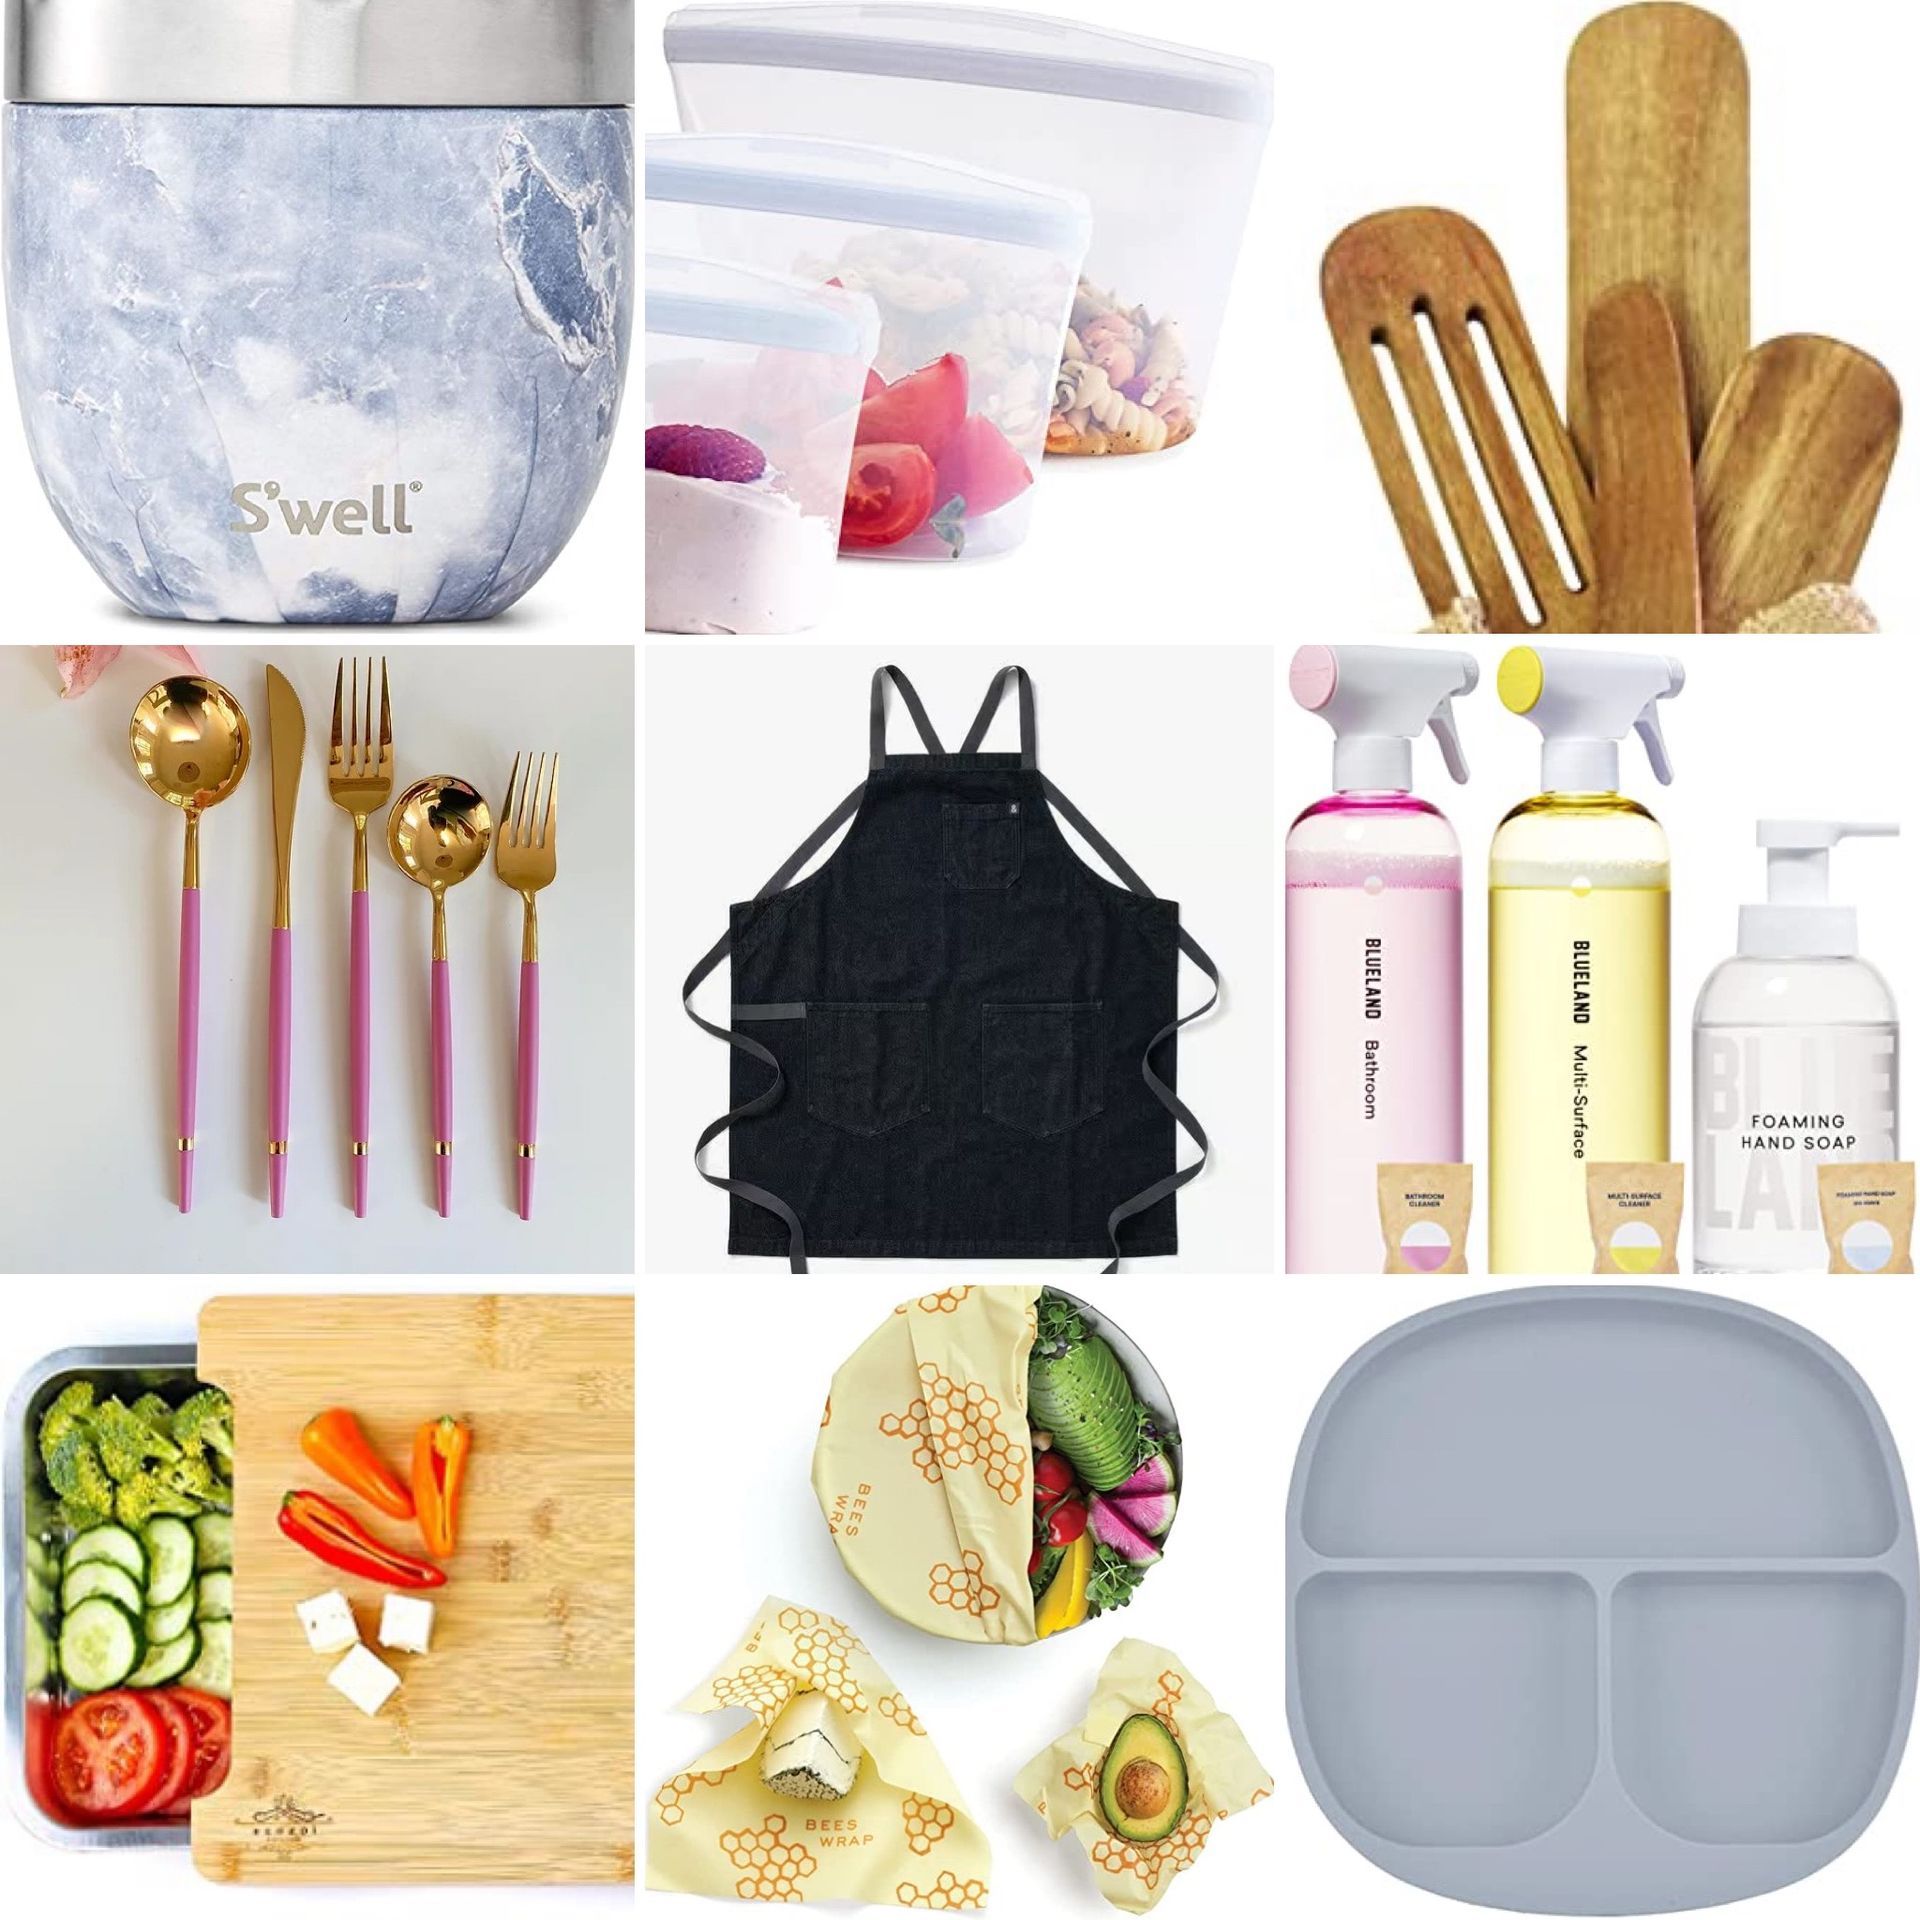 nine kitchen products from women-owned businesses